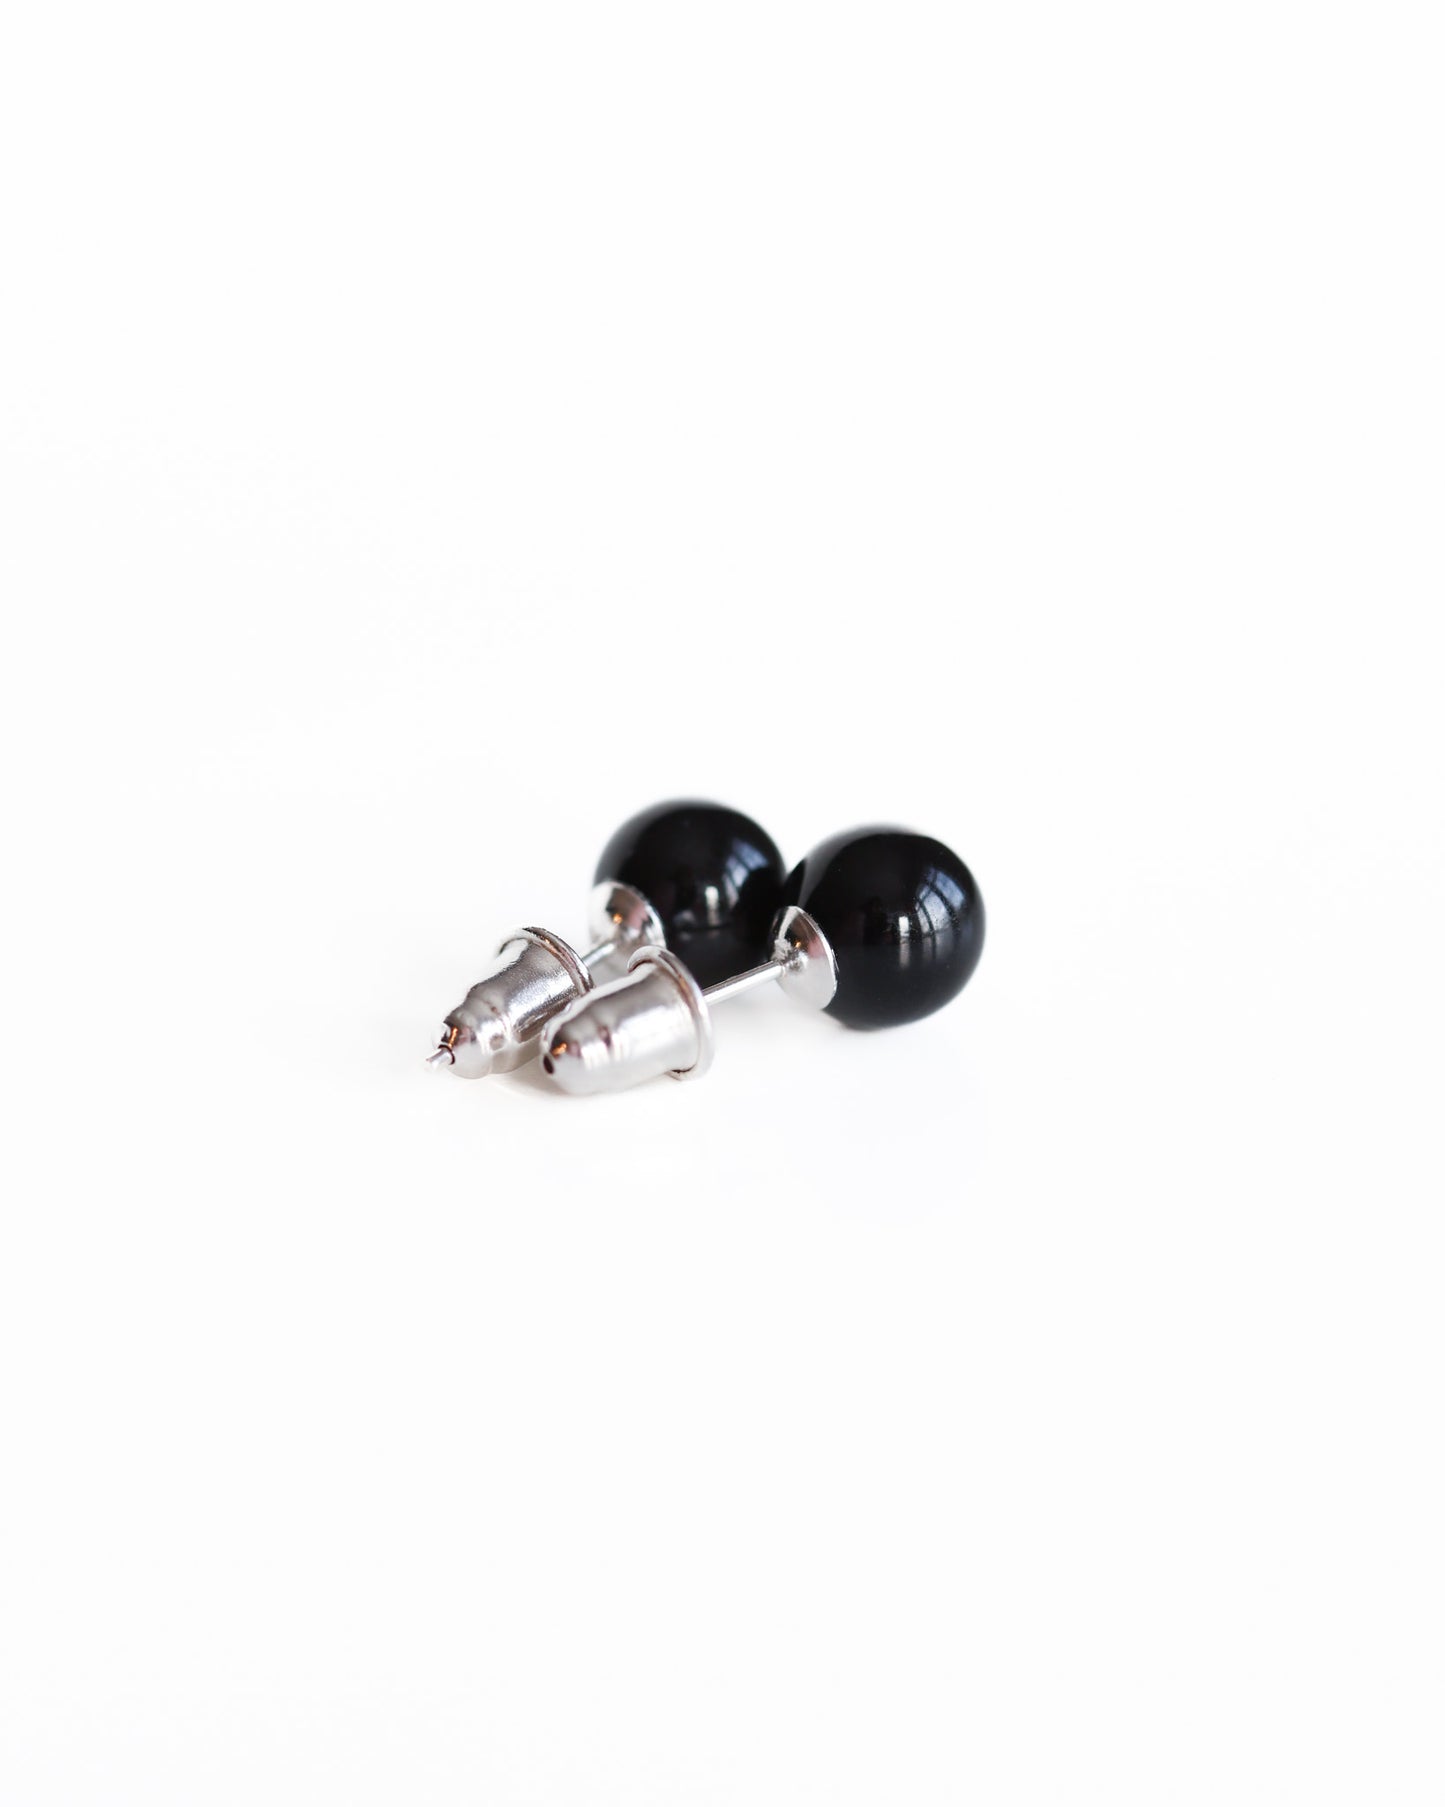 Black Agate Stud Earrings with Sterling Silver Posts